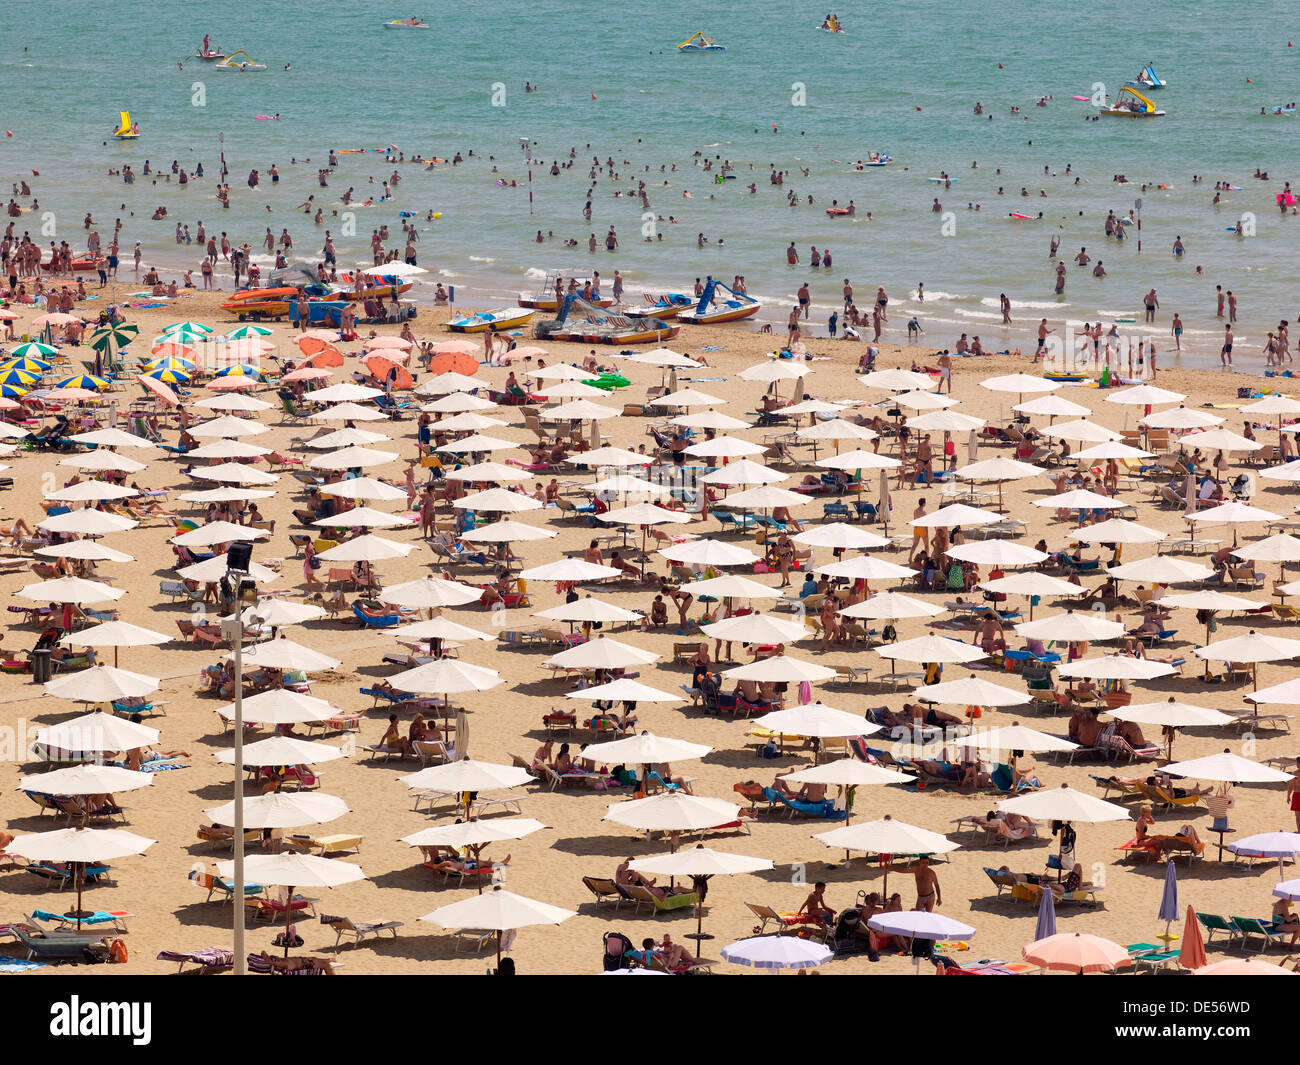 View of the beach with parasols, sun loungers and bathers, Lignano Sabbiadoro, Udine, Adriatic Coast, Italy, Europe Stock Photo